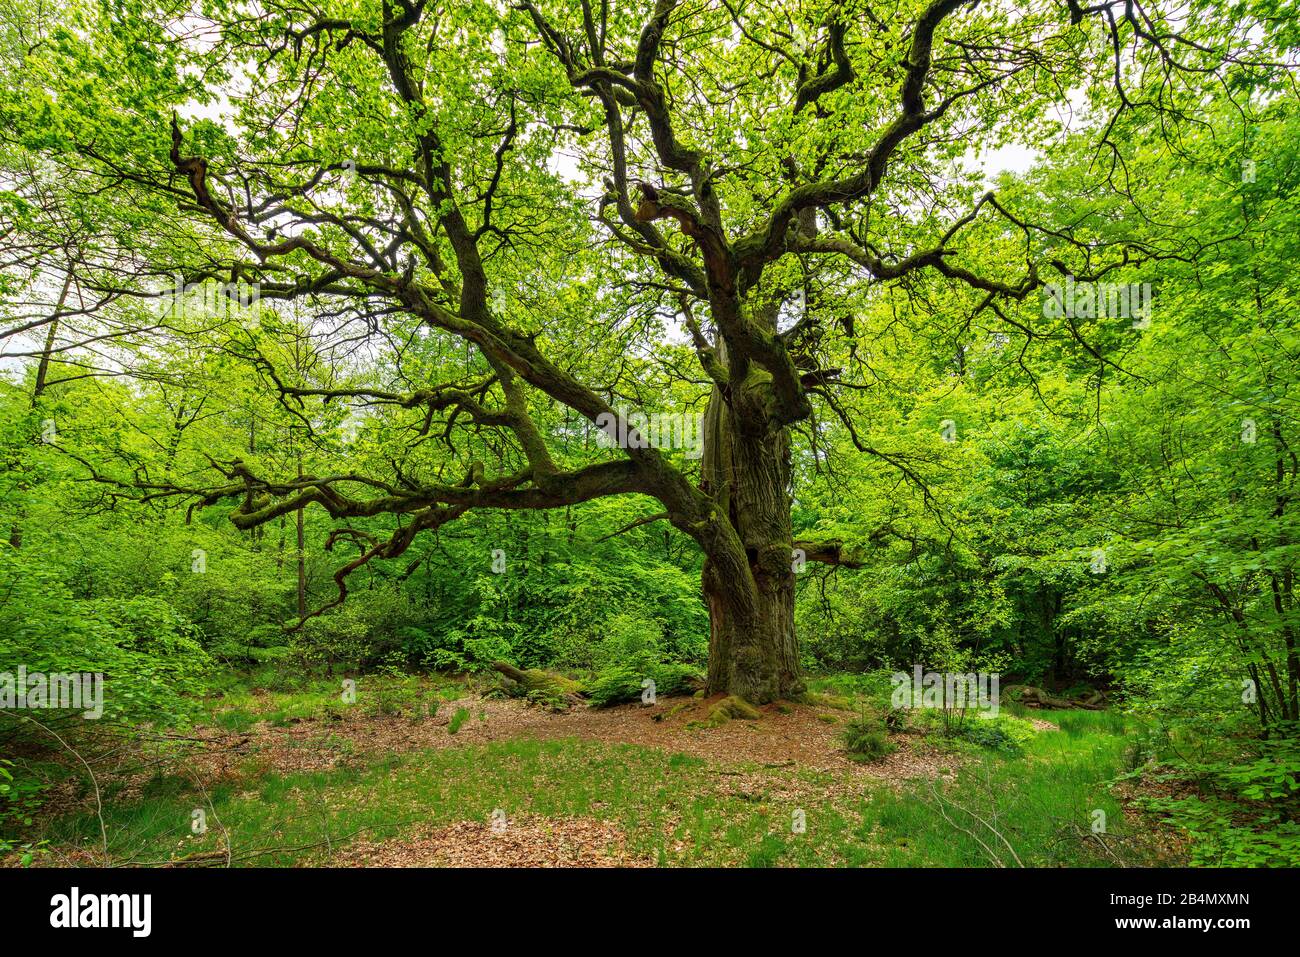 Huge gnarled old oak (Quercus robur) on clearing in green forest in spring, branches covered by moss, fresh greenery, former hat tree, Reinhardswald, Hesse, Germany Stock Photo